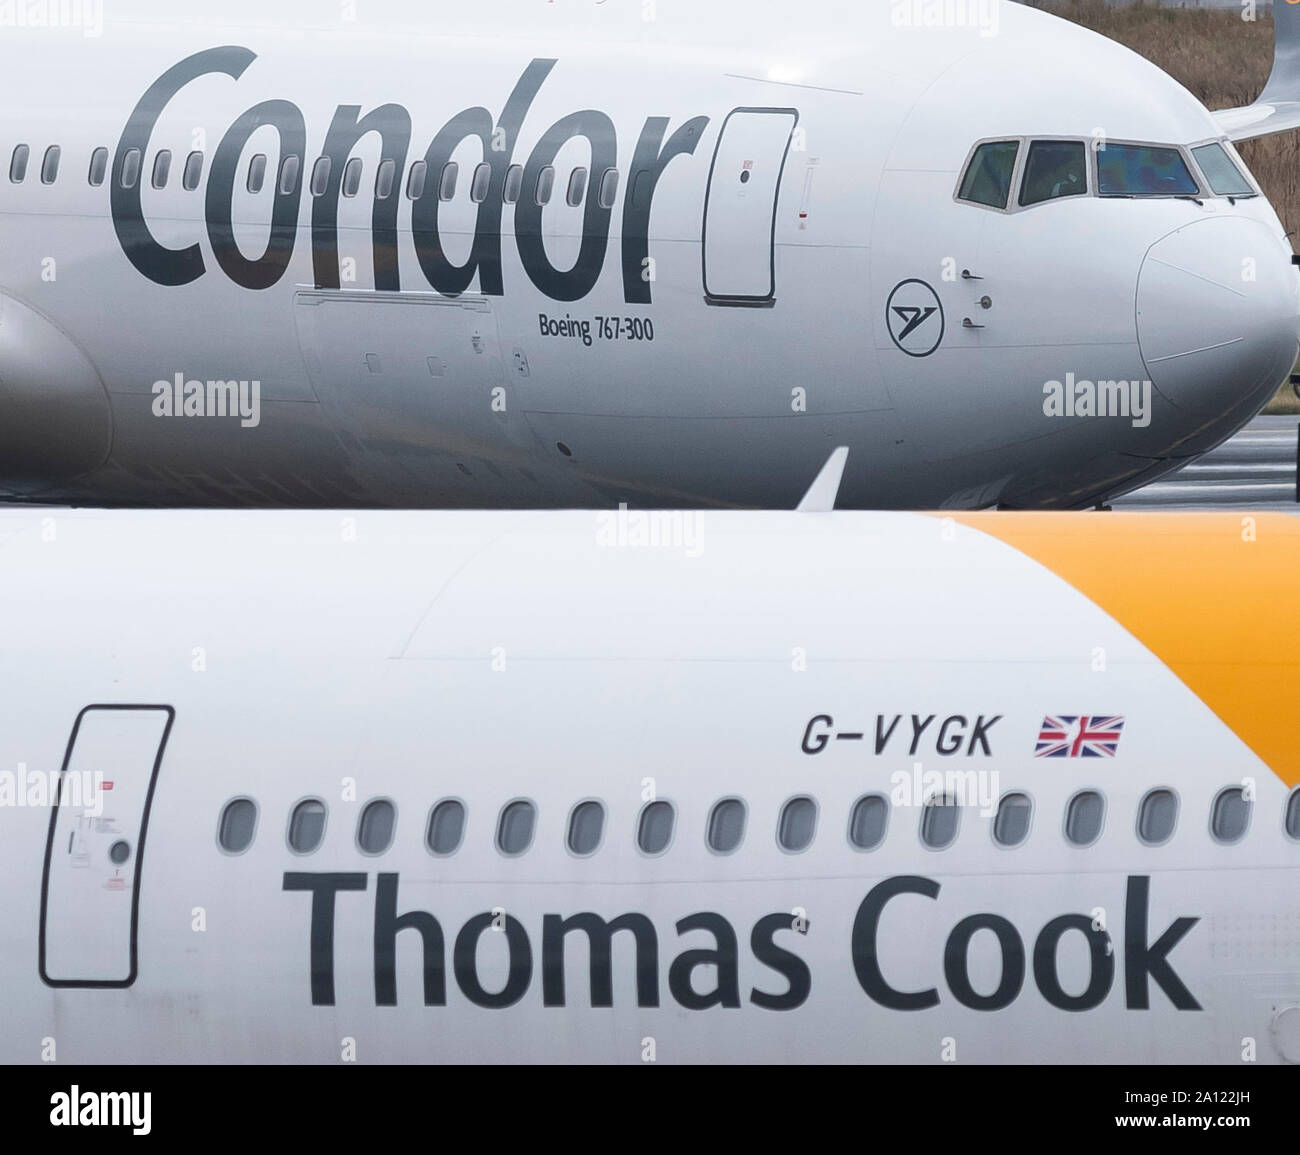 Condor boeing 767 300 hi-res stock photography and images - Page 2 - Alamy